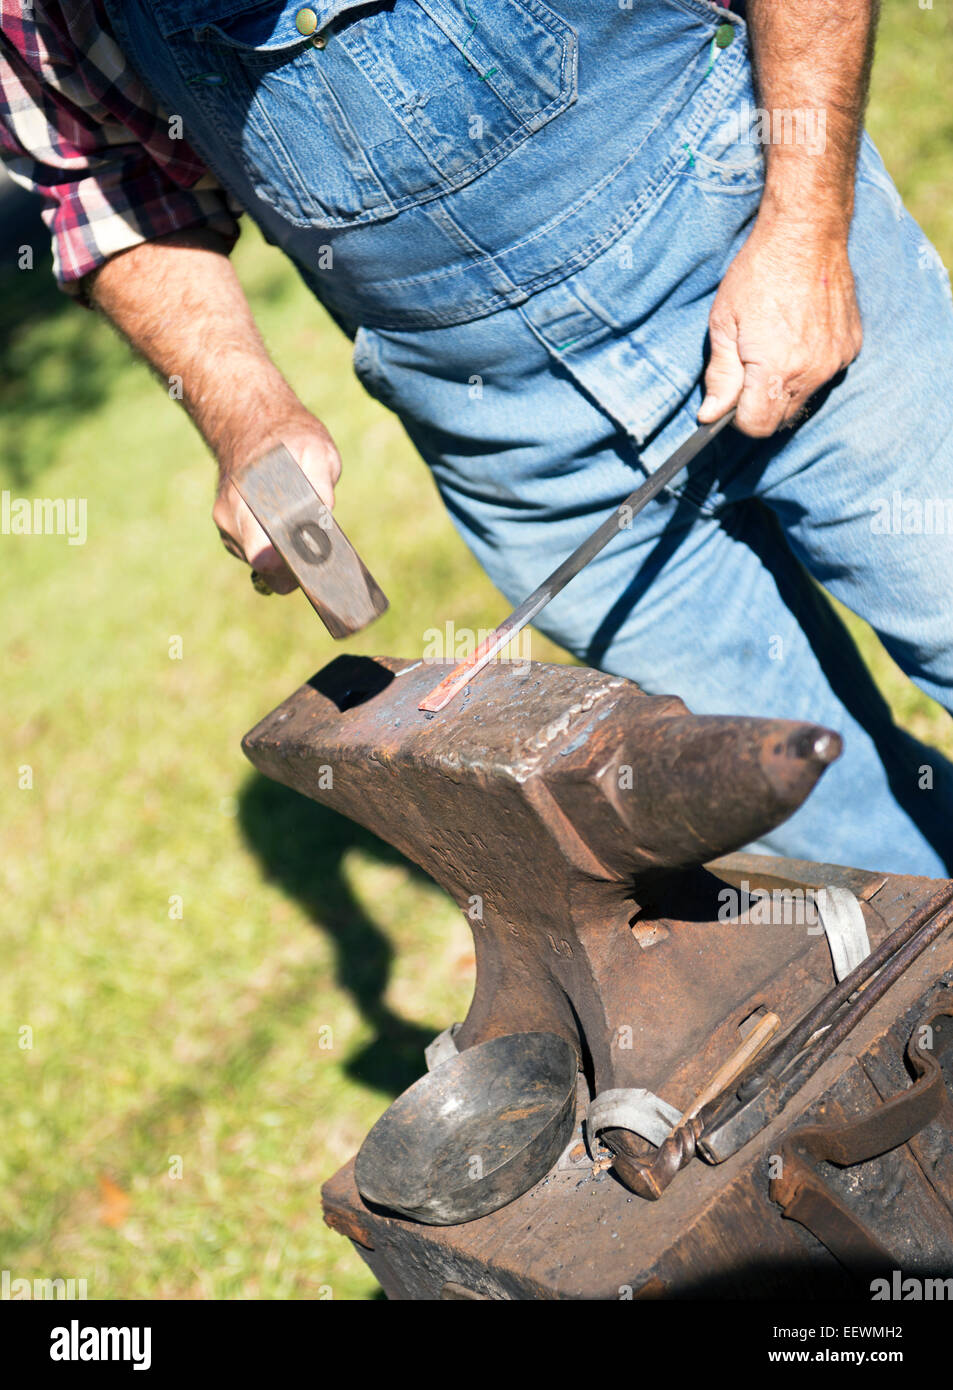 Blacksmith pounding steel on an anvil outdoors -  off center Stock Photo